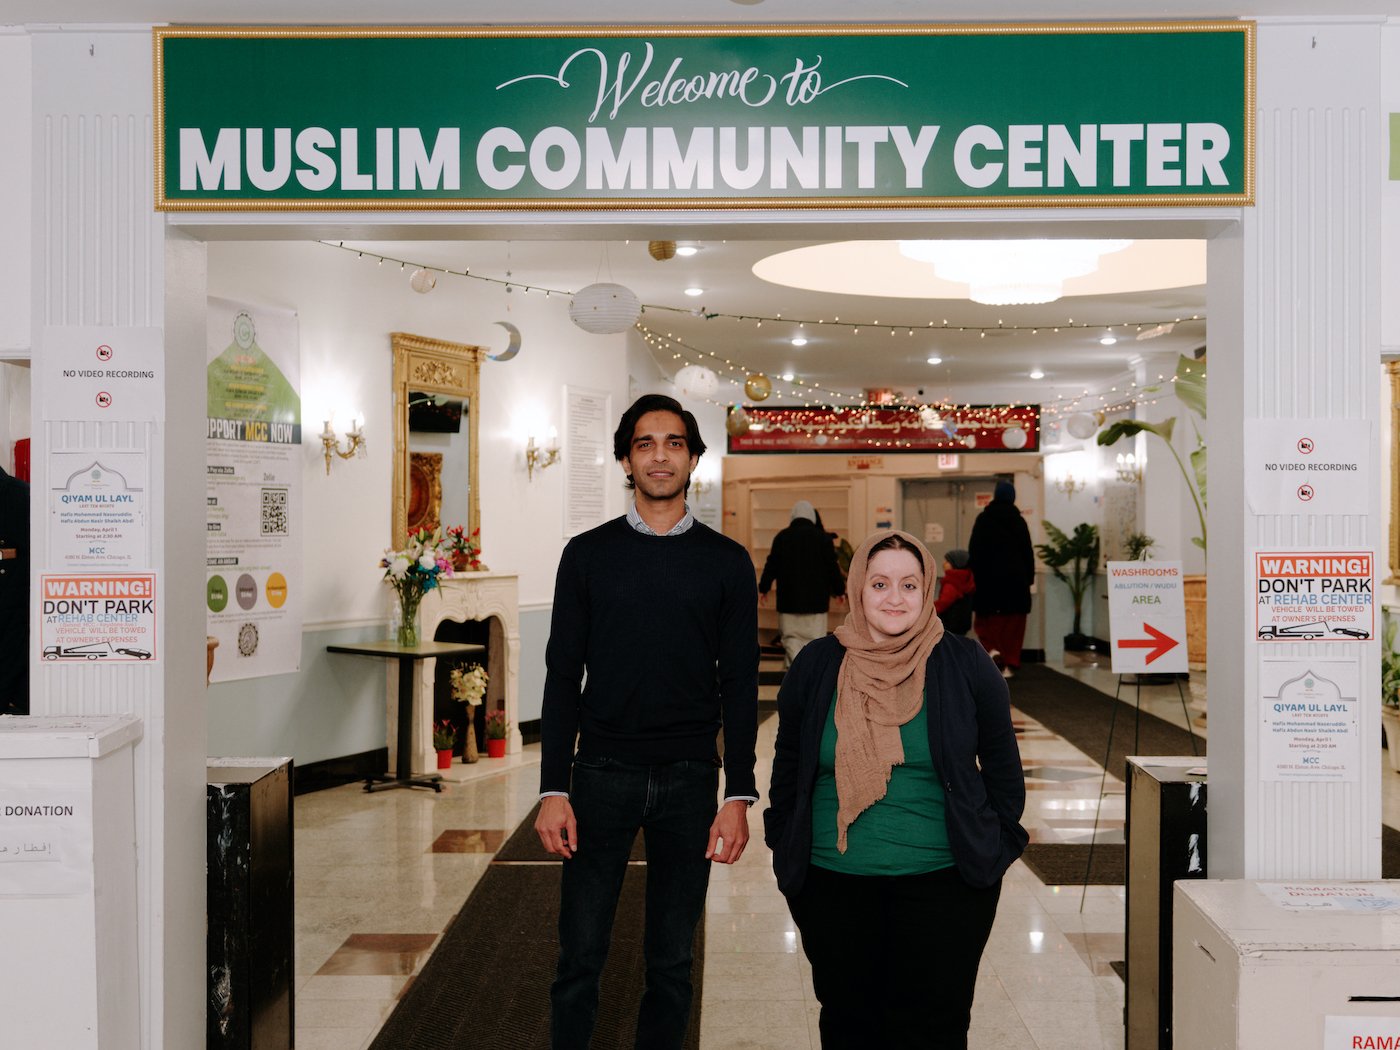 Azim Gandhi and Amal Muhsin stand under a sign that says "Welcome to Muslim Community Center"